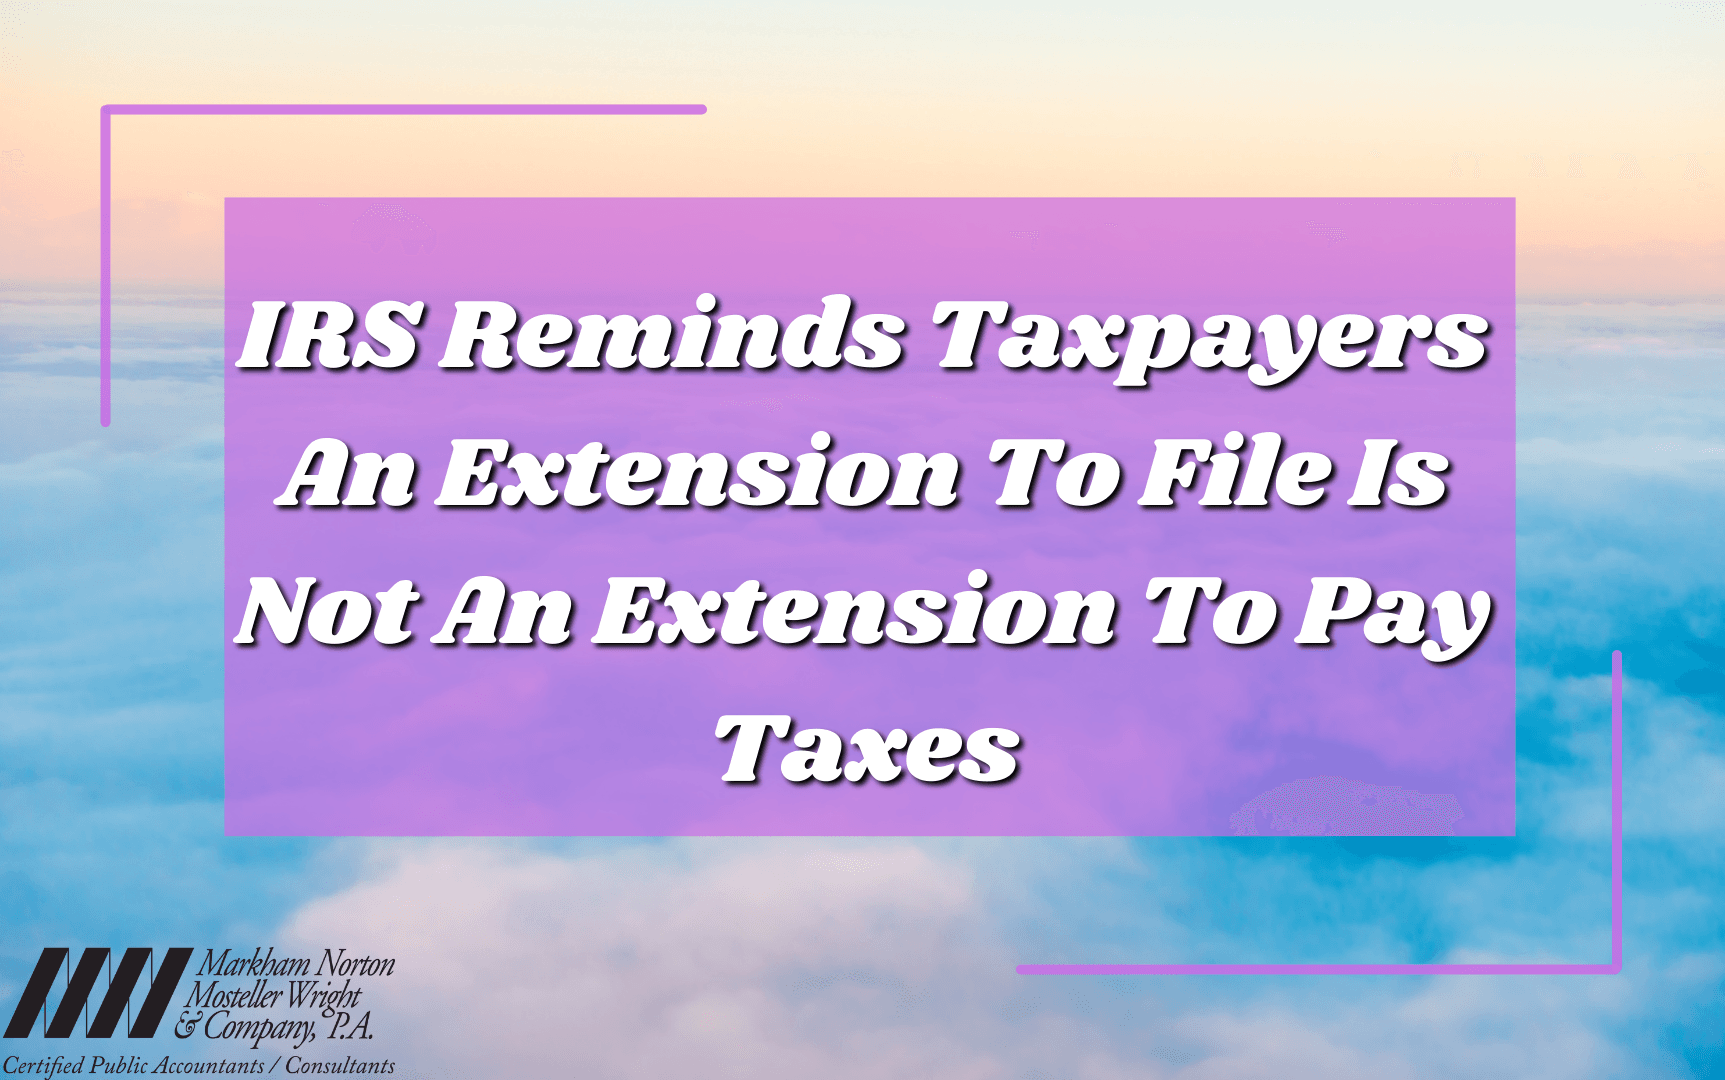 An extensioon to file is not an extension to pay taxes